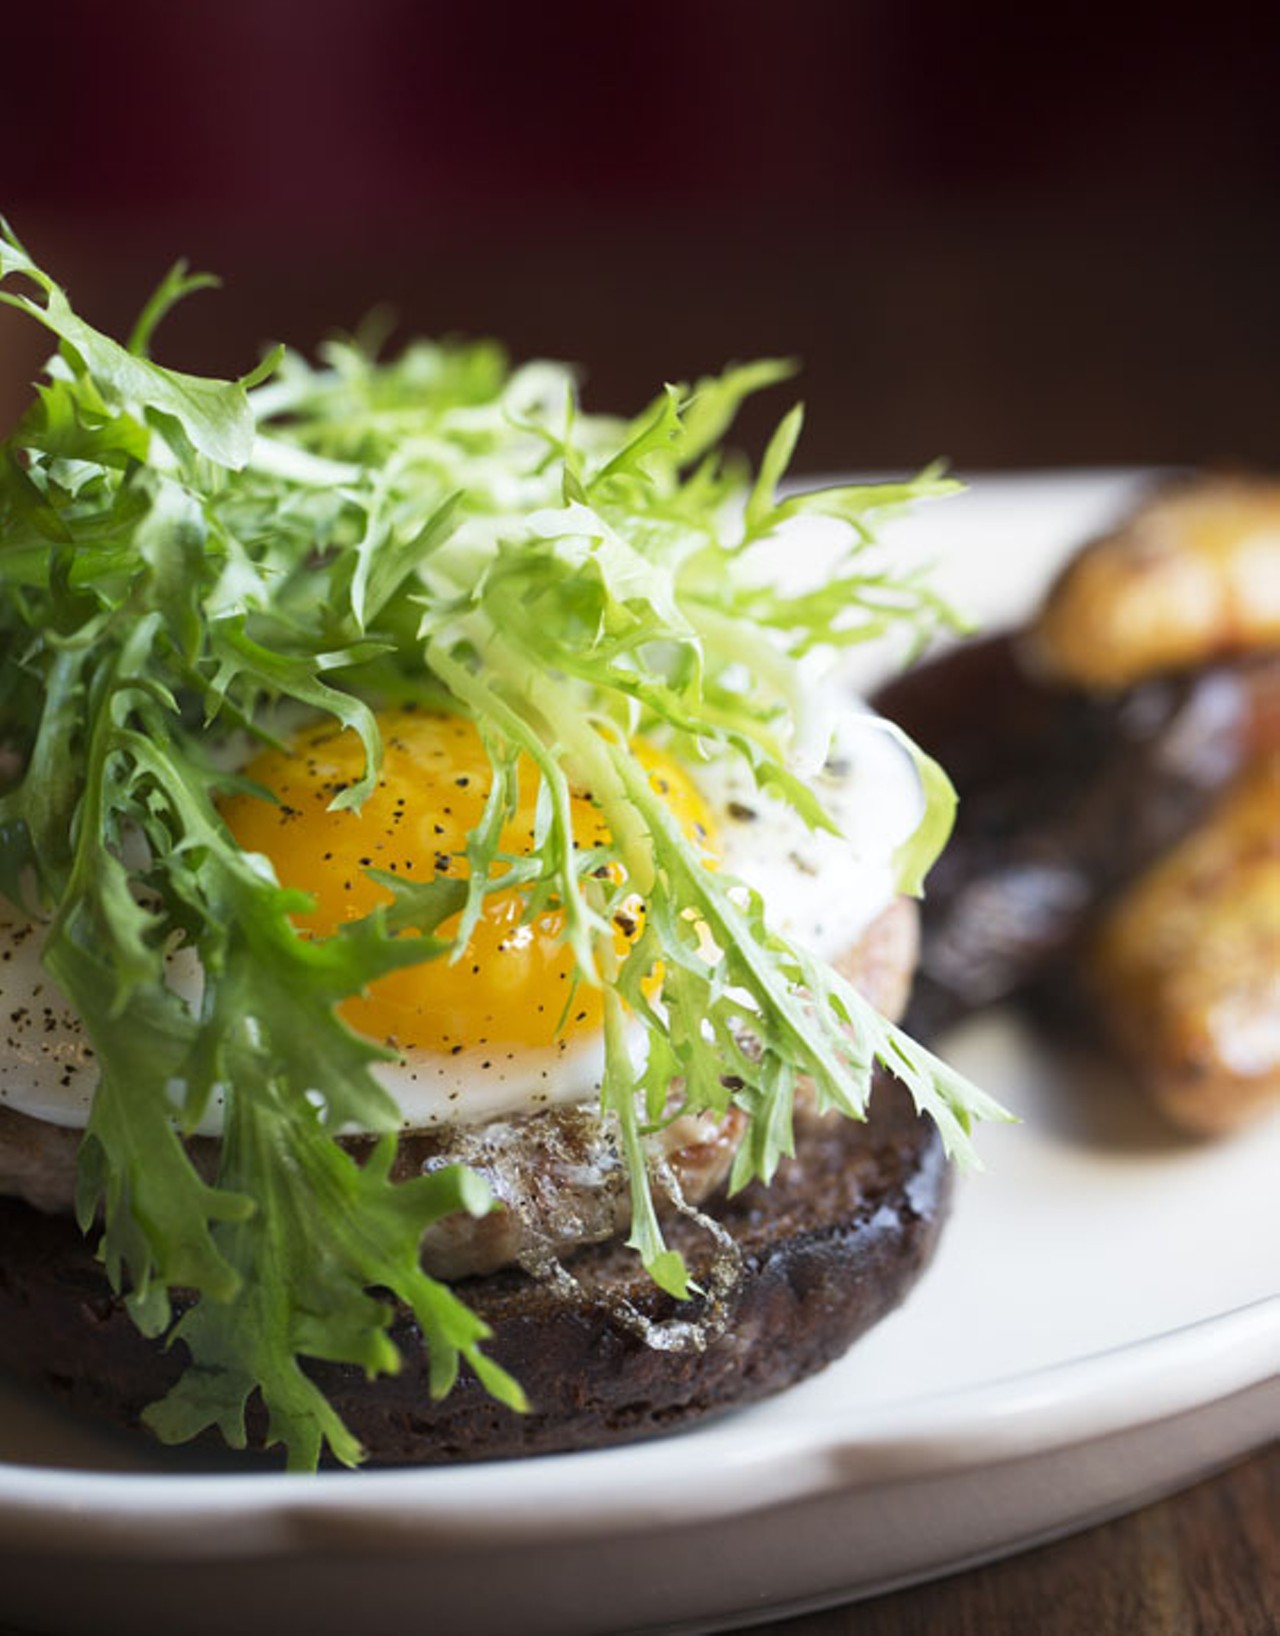 The duck burger is topped with Gouda, a fried duck egg and frisee that's tossed in vinaigrette and served open-face on a pumpernickel bun. Smashed and fried fingerlind potatoes come on the side.